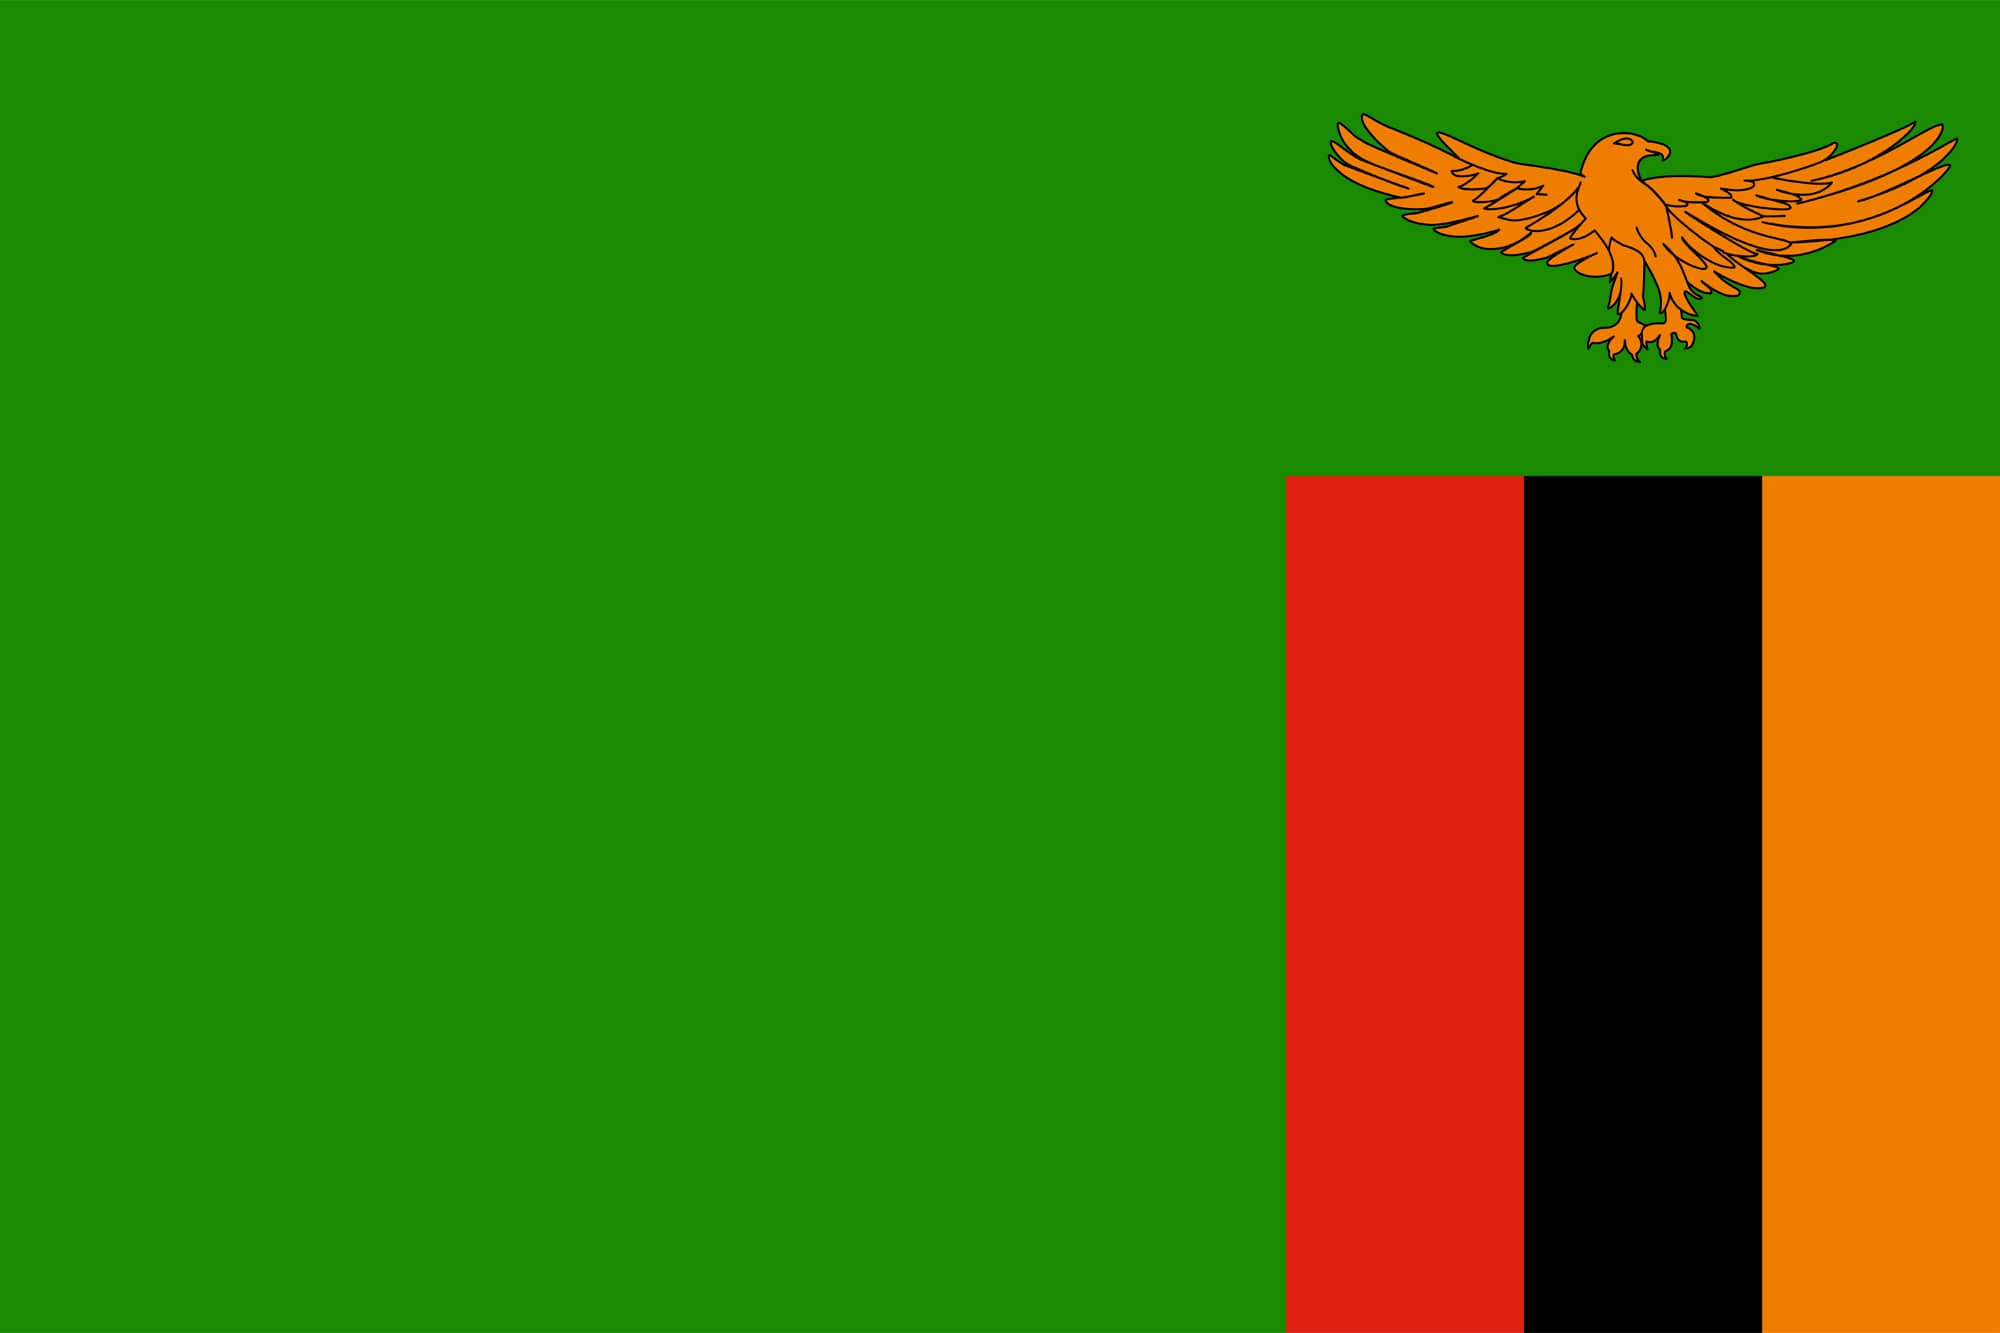 IMMAF welcomes nationally recognised Zambian Federation with its focus on social change